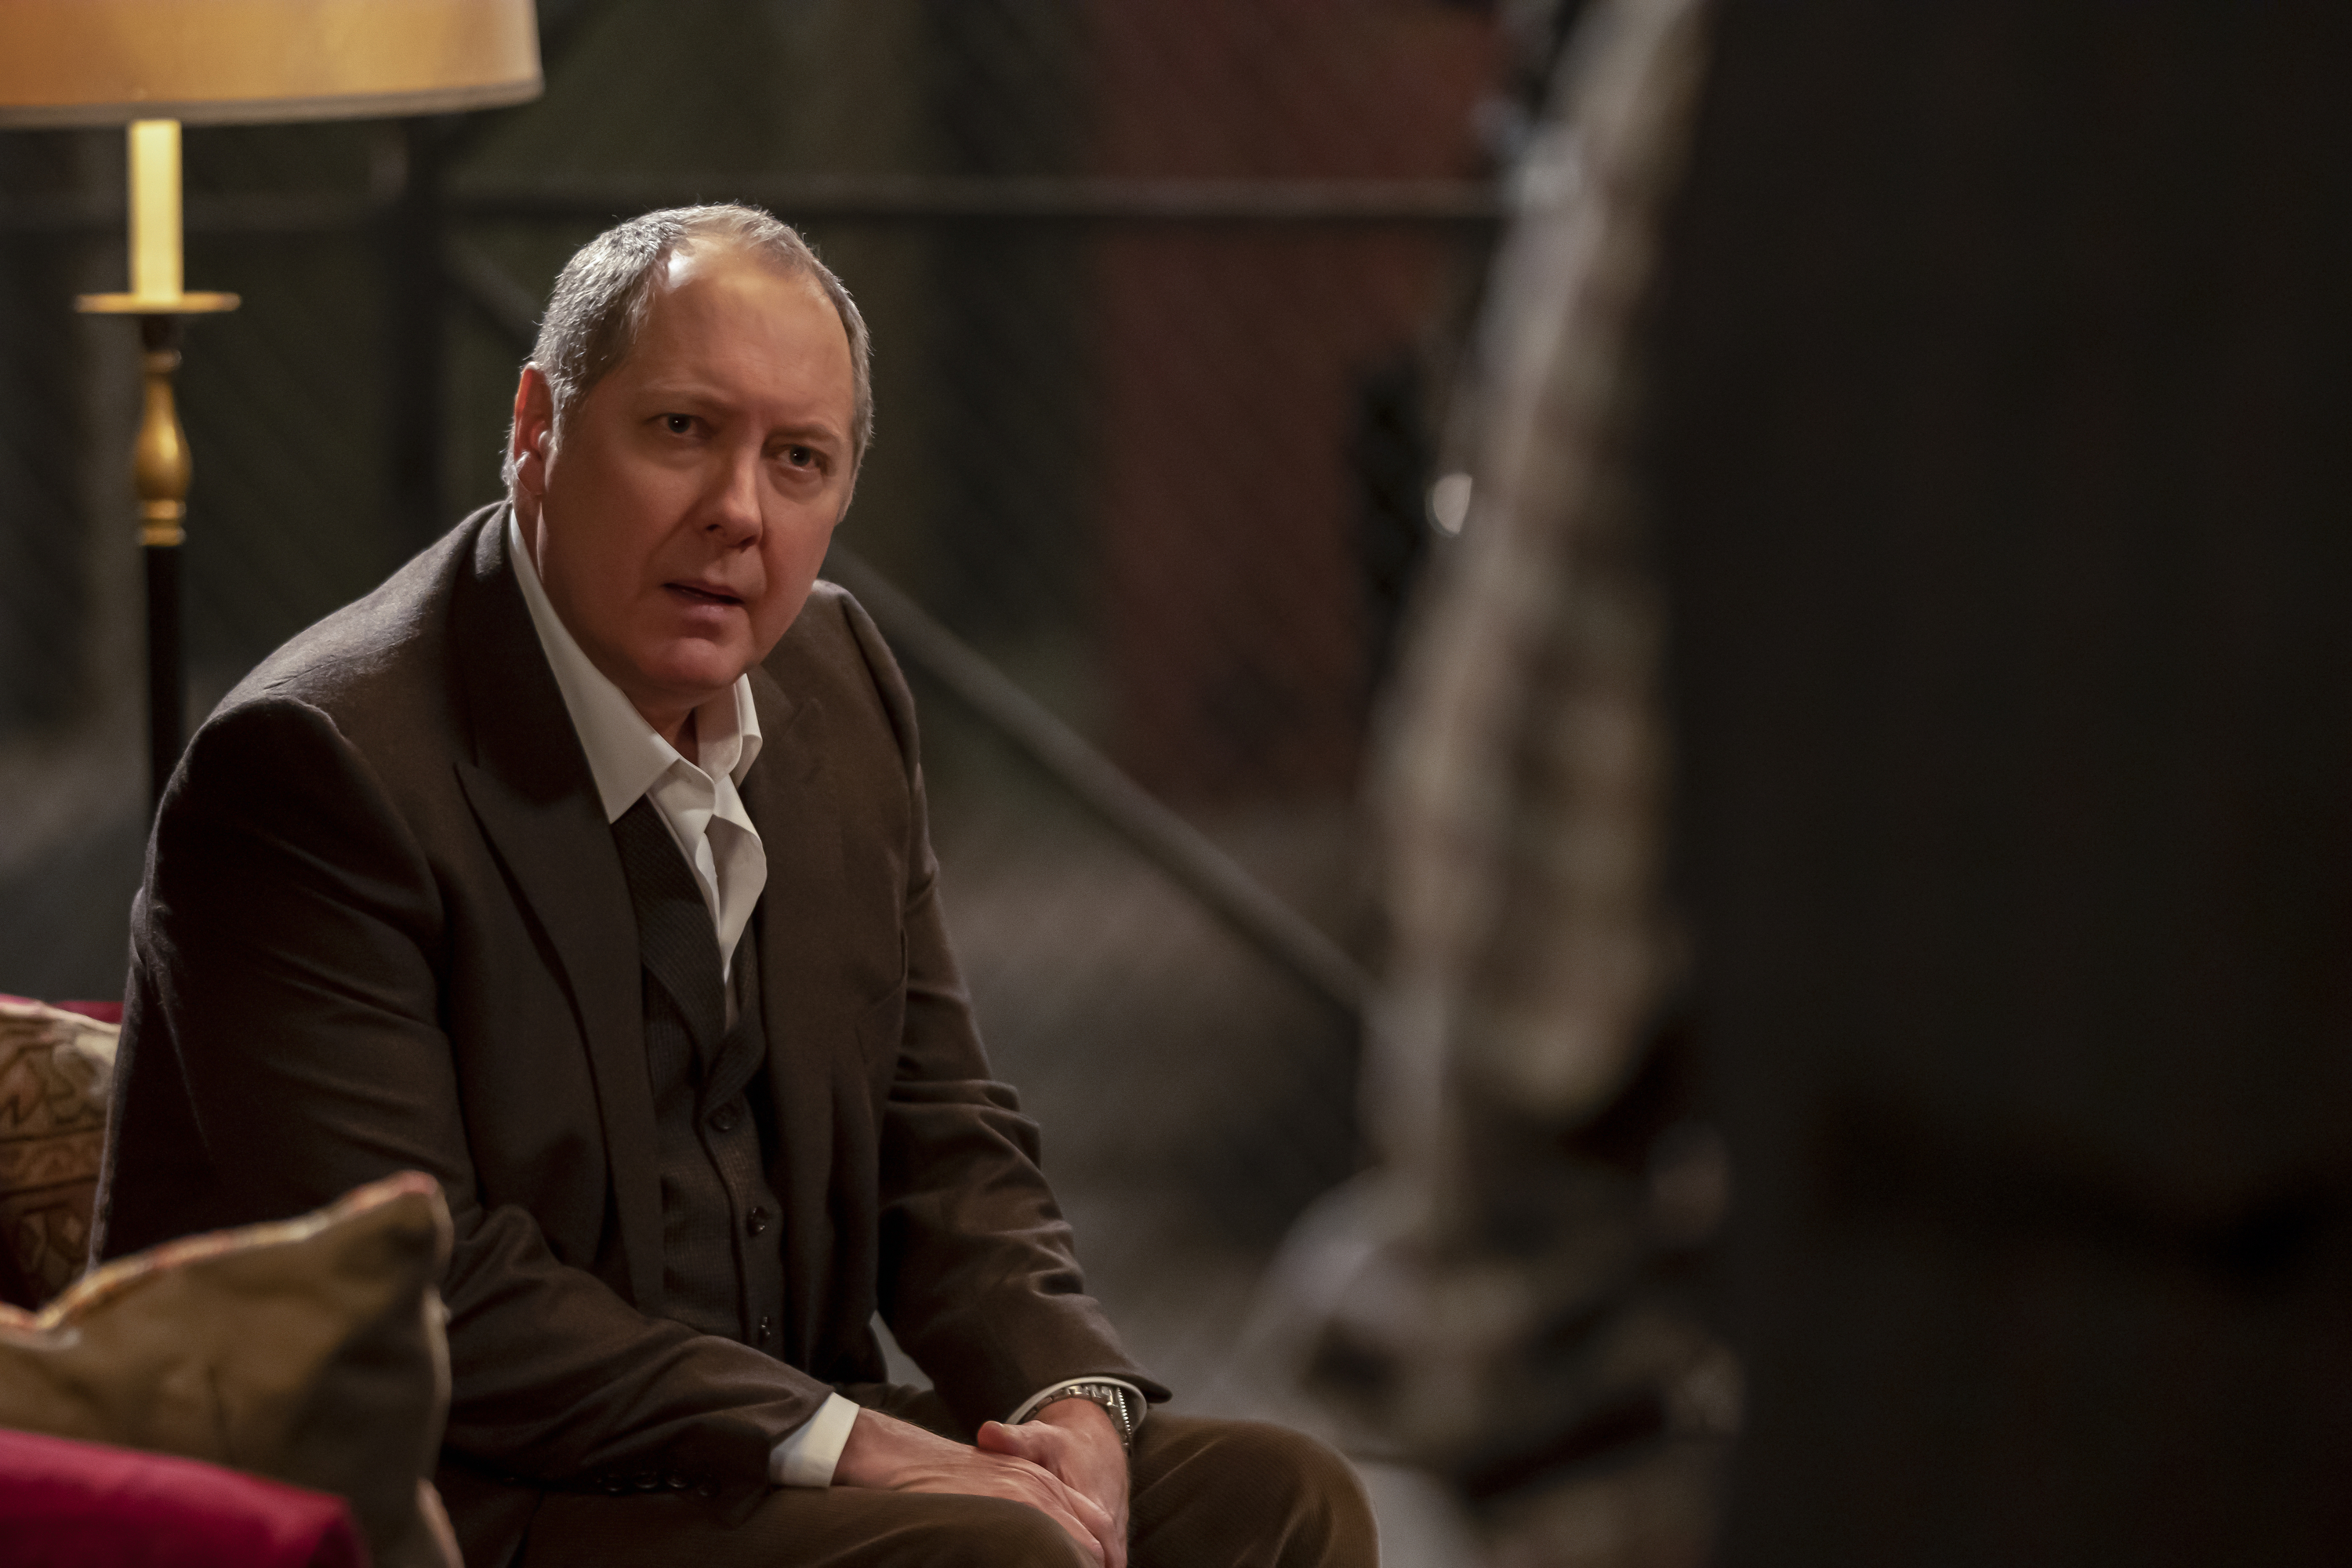 James Spader as Raymond "Red" Reddington in "The Blacklist" season 9 in 2022 | Source: Getty Images